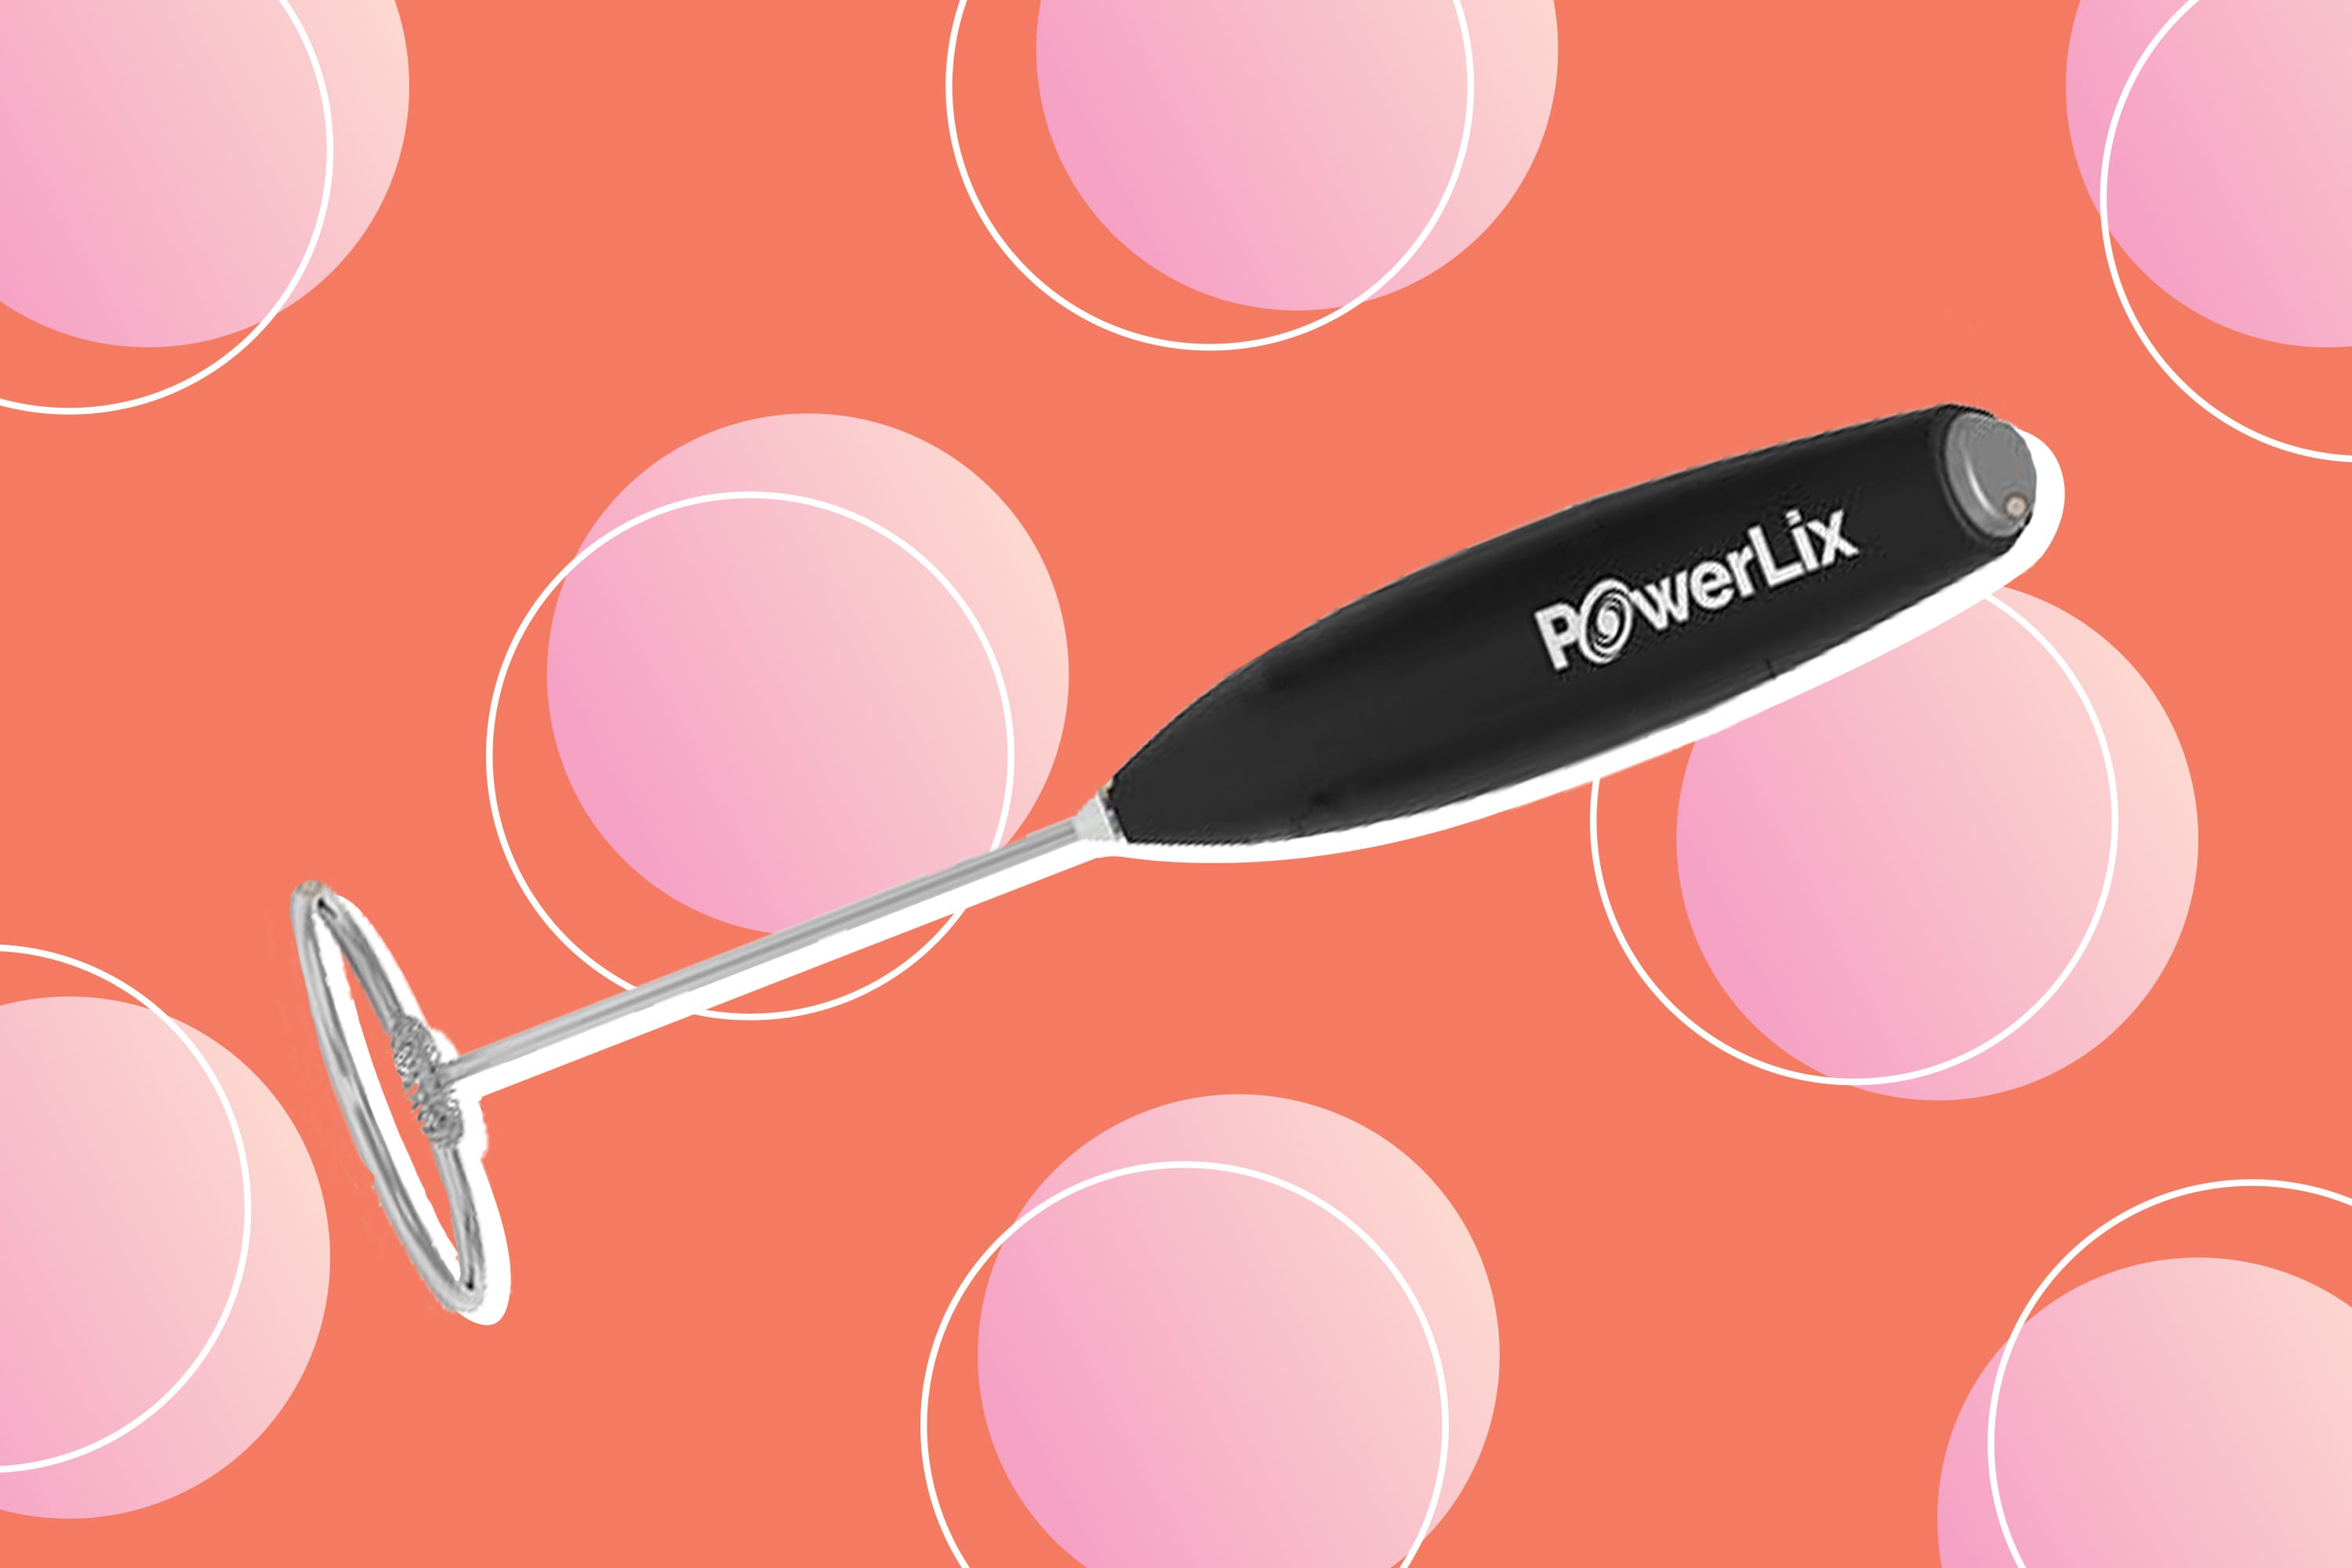 Breville Milk Frother – The Happy Cook